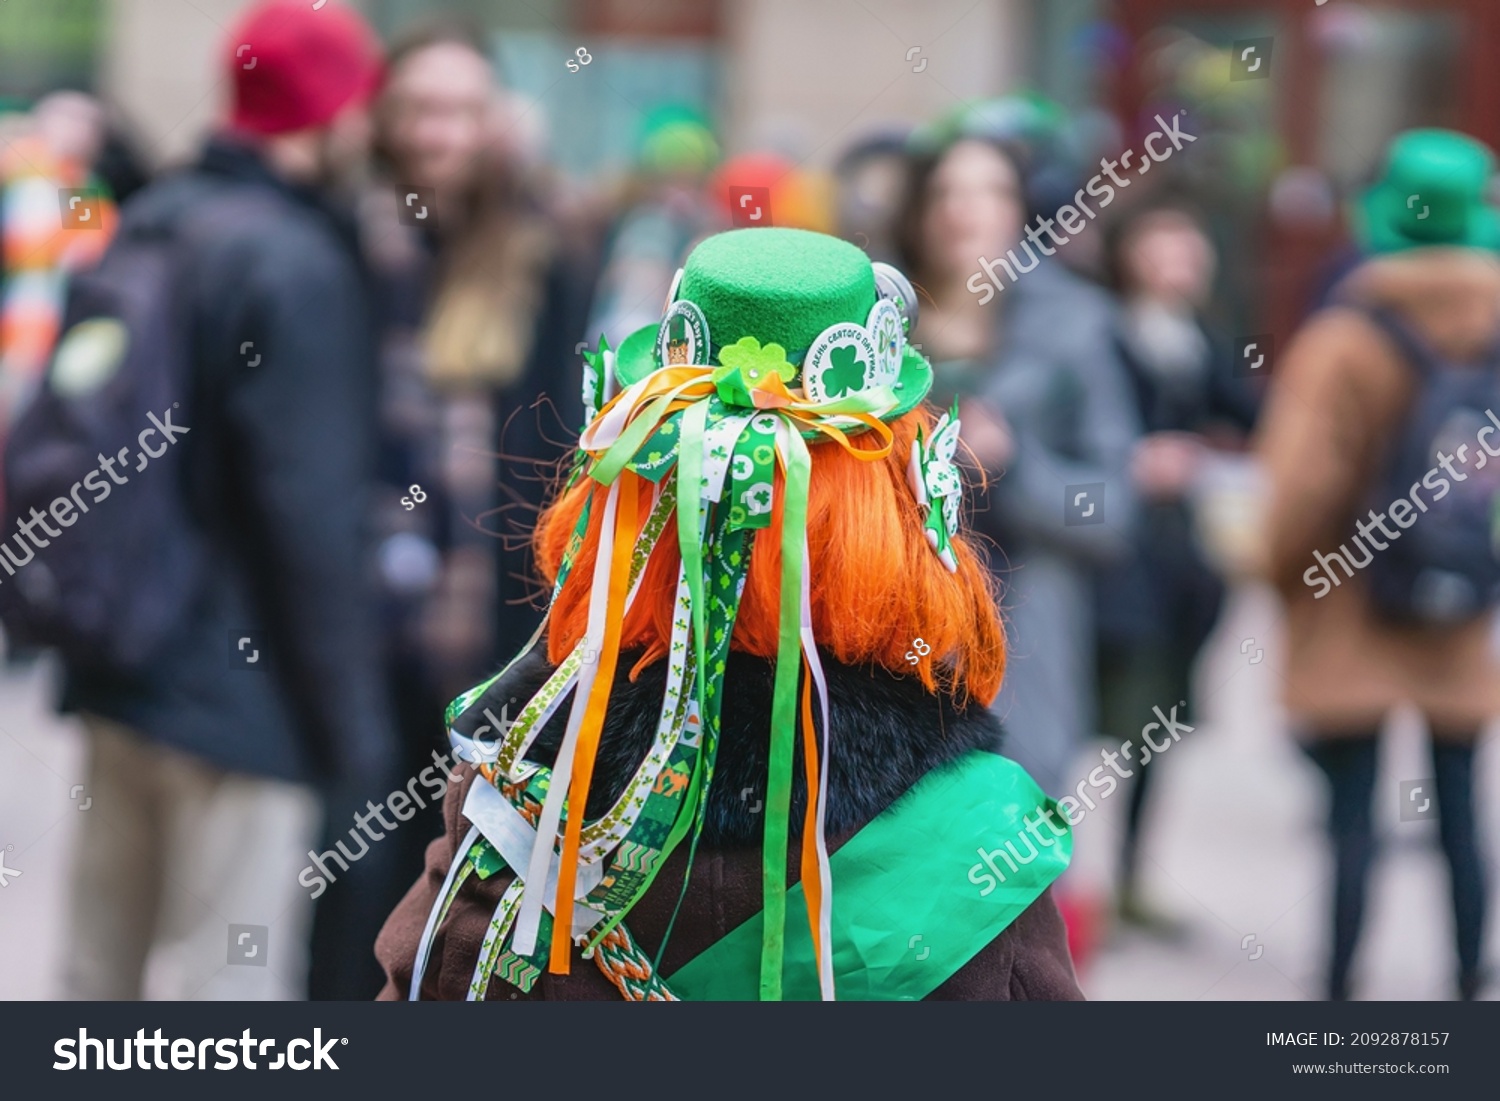 Back view of girl with red hair in hat with decorations, symbols of St. Patrick's Day, parade in city #2092878157